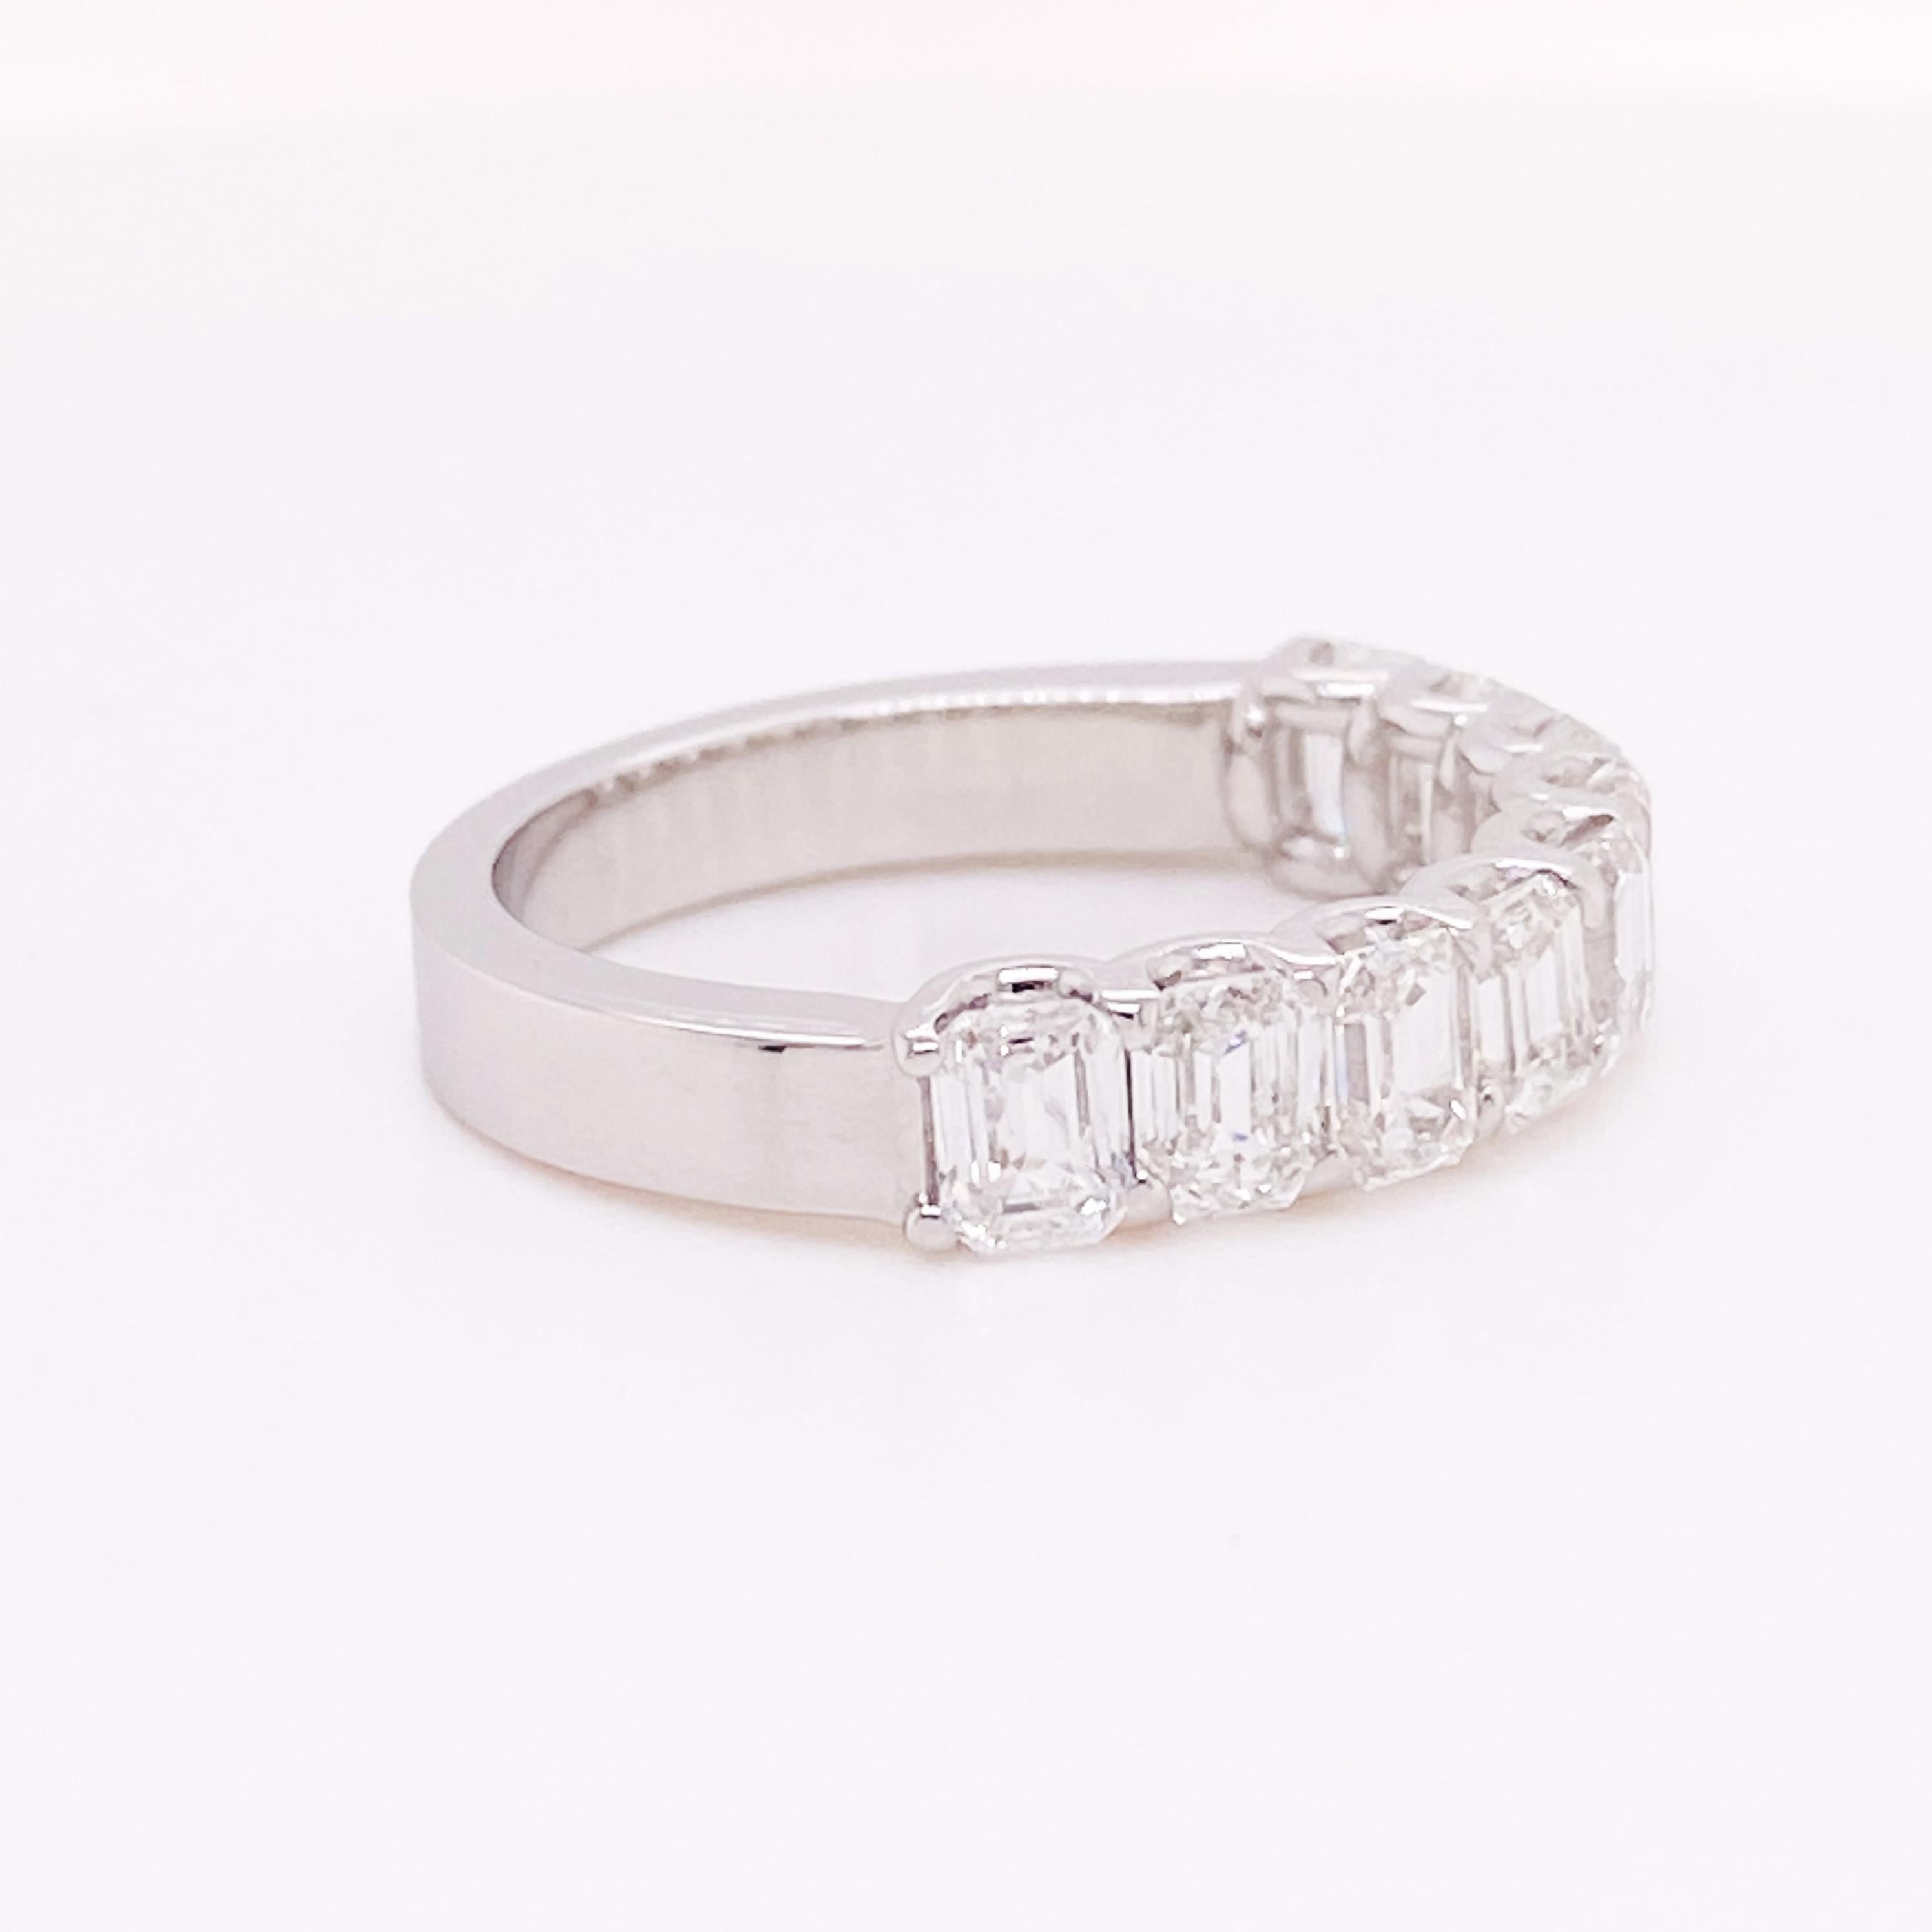 10 Emerald Cut Diamond Band w 2.40 Carats total weight. These diamonds are incredible w lux design and quality. The band is a simple design but incredibly classy. The emerald cut diamonds are VS1 clarity and E/F color.  The ring is made from high